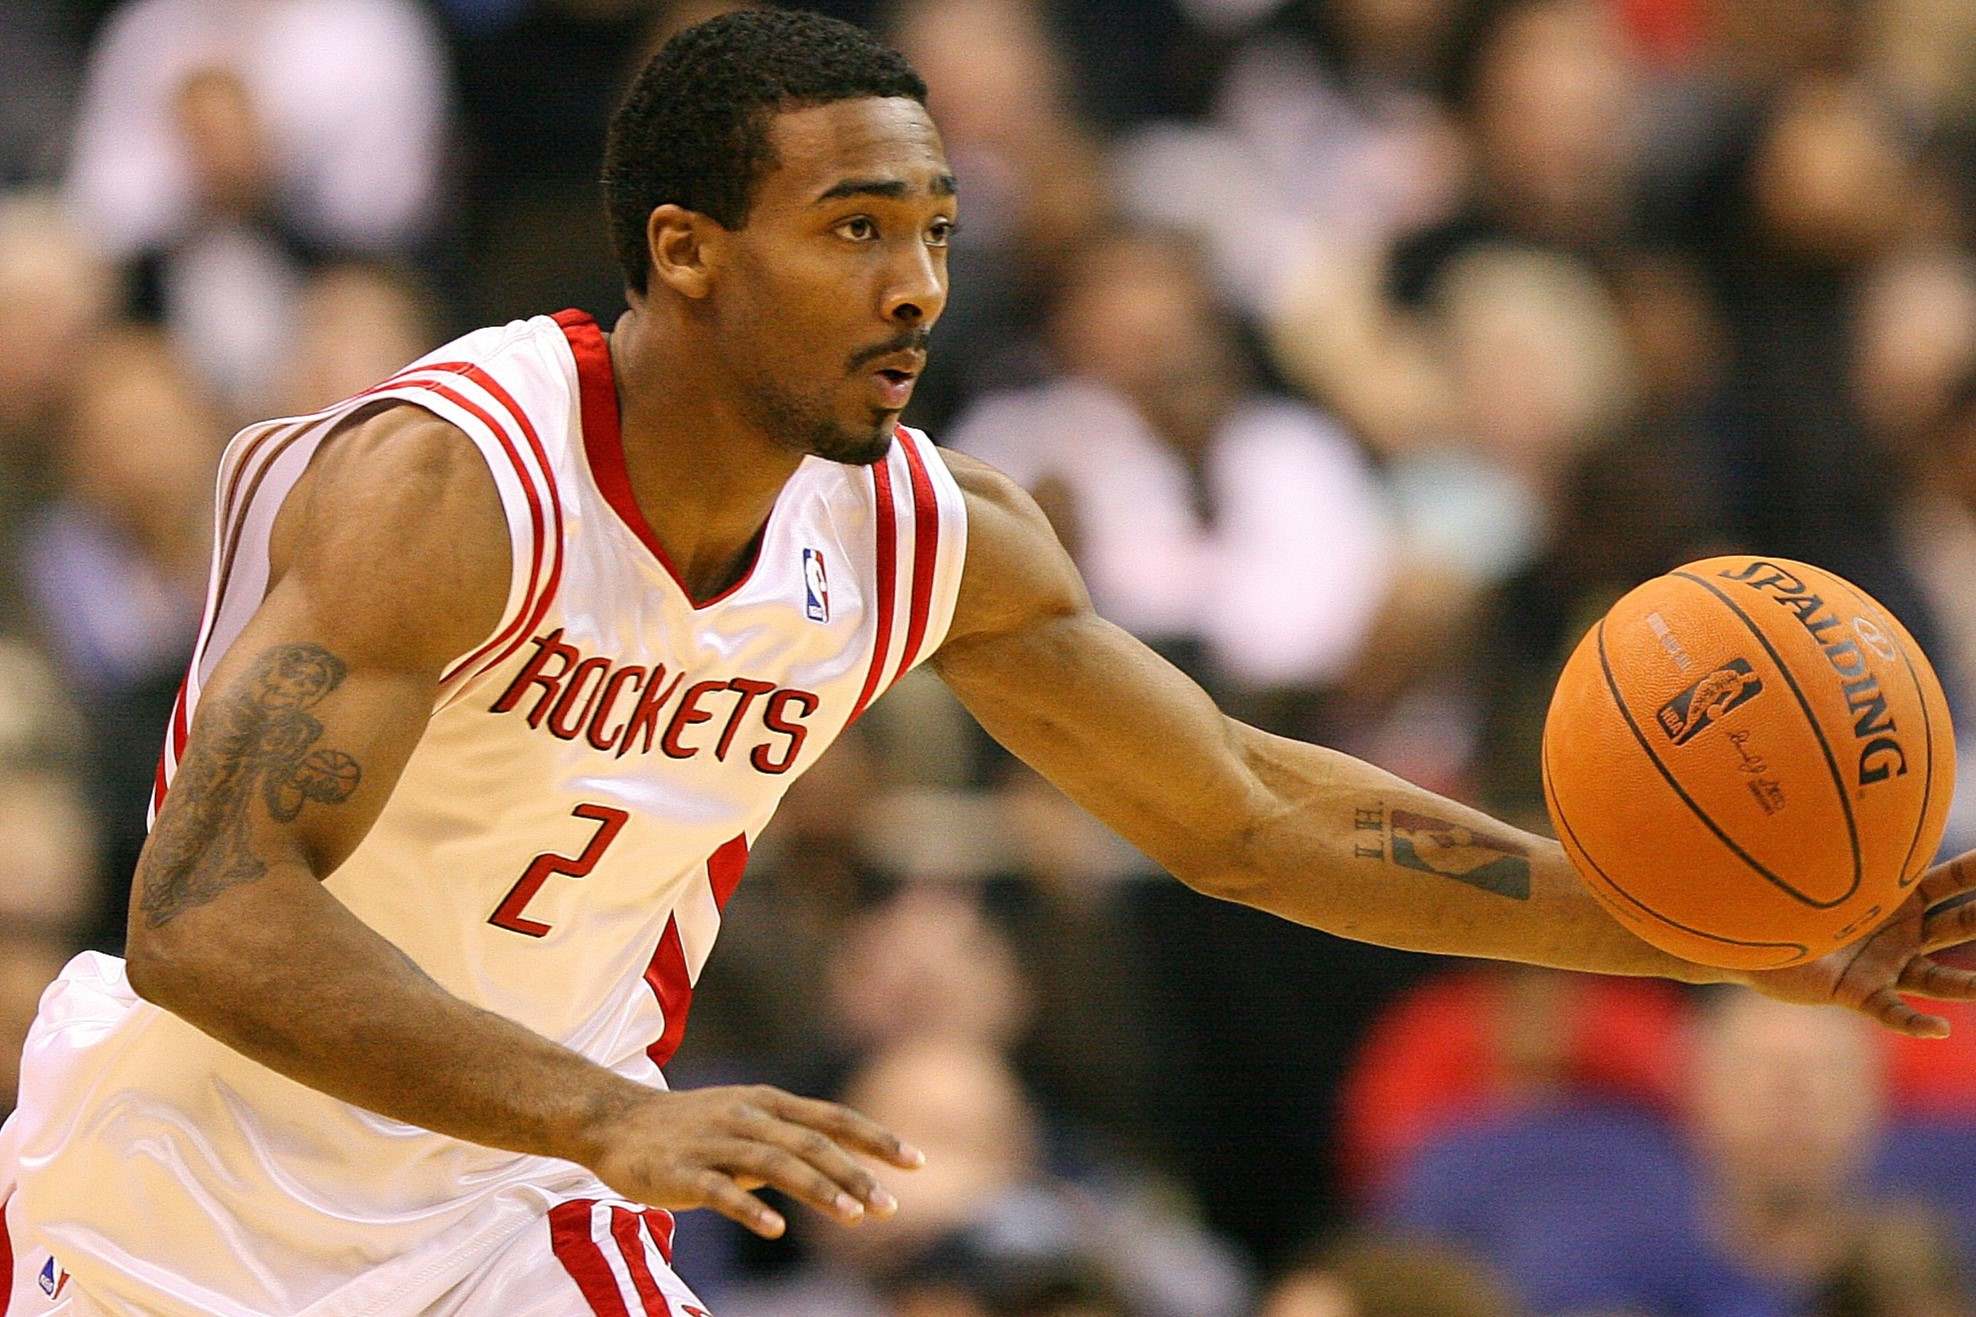 Ex NBA Guard Luther Head Hopes To Play Overseas To Resurrect His NBA Career